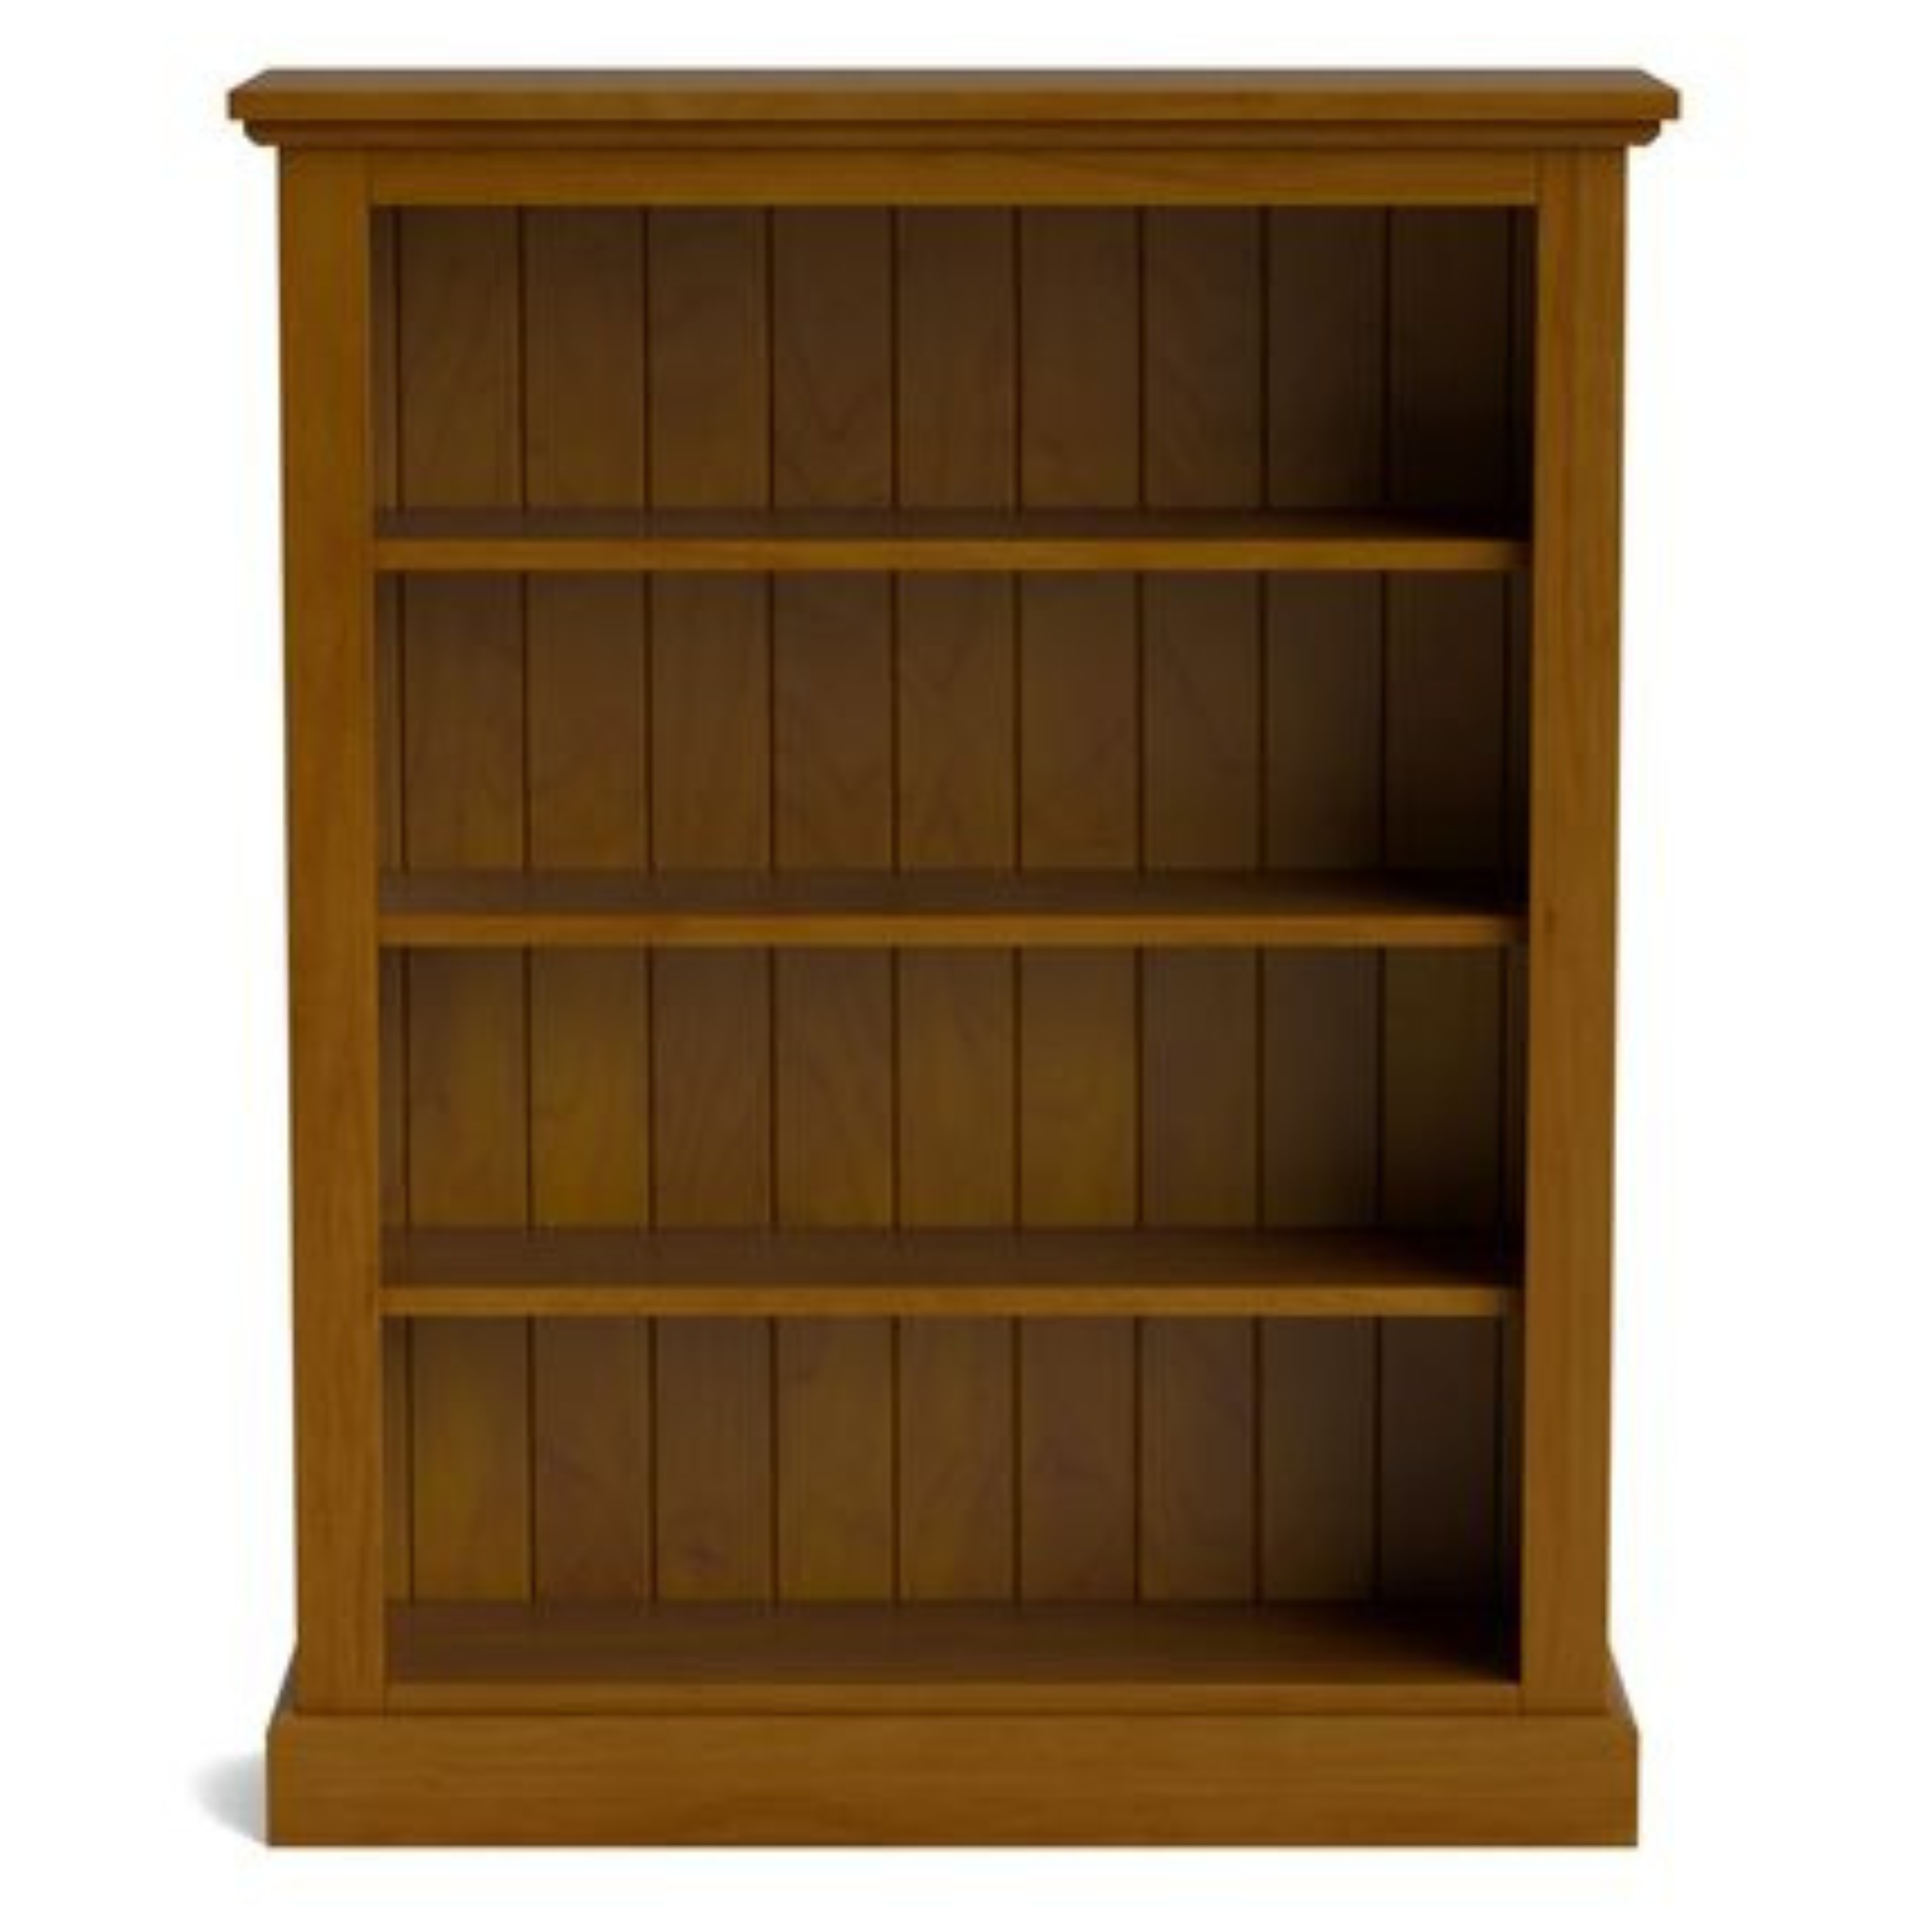 CHARLTON SOLID TIMBER BOOKCASE - DIFFERENT SIZES AVAILABLE | NZ MADE